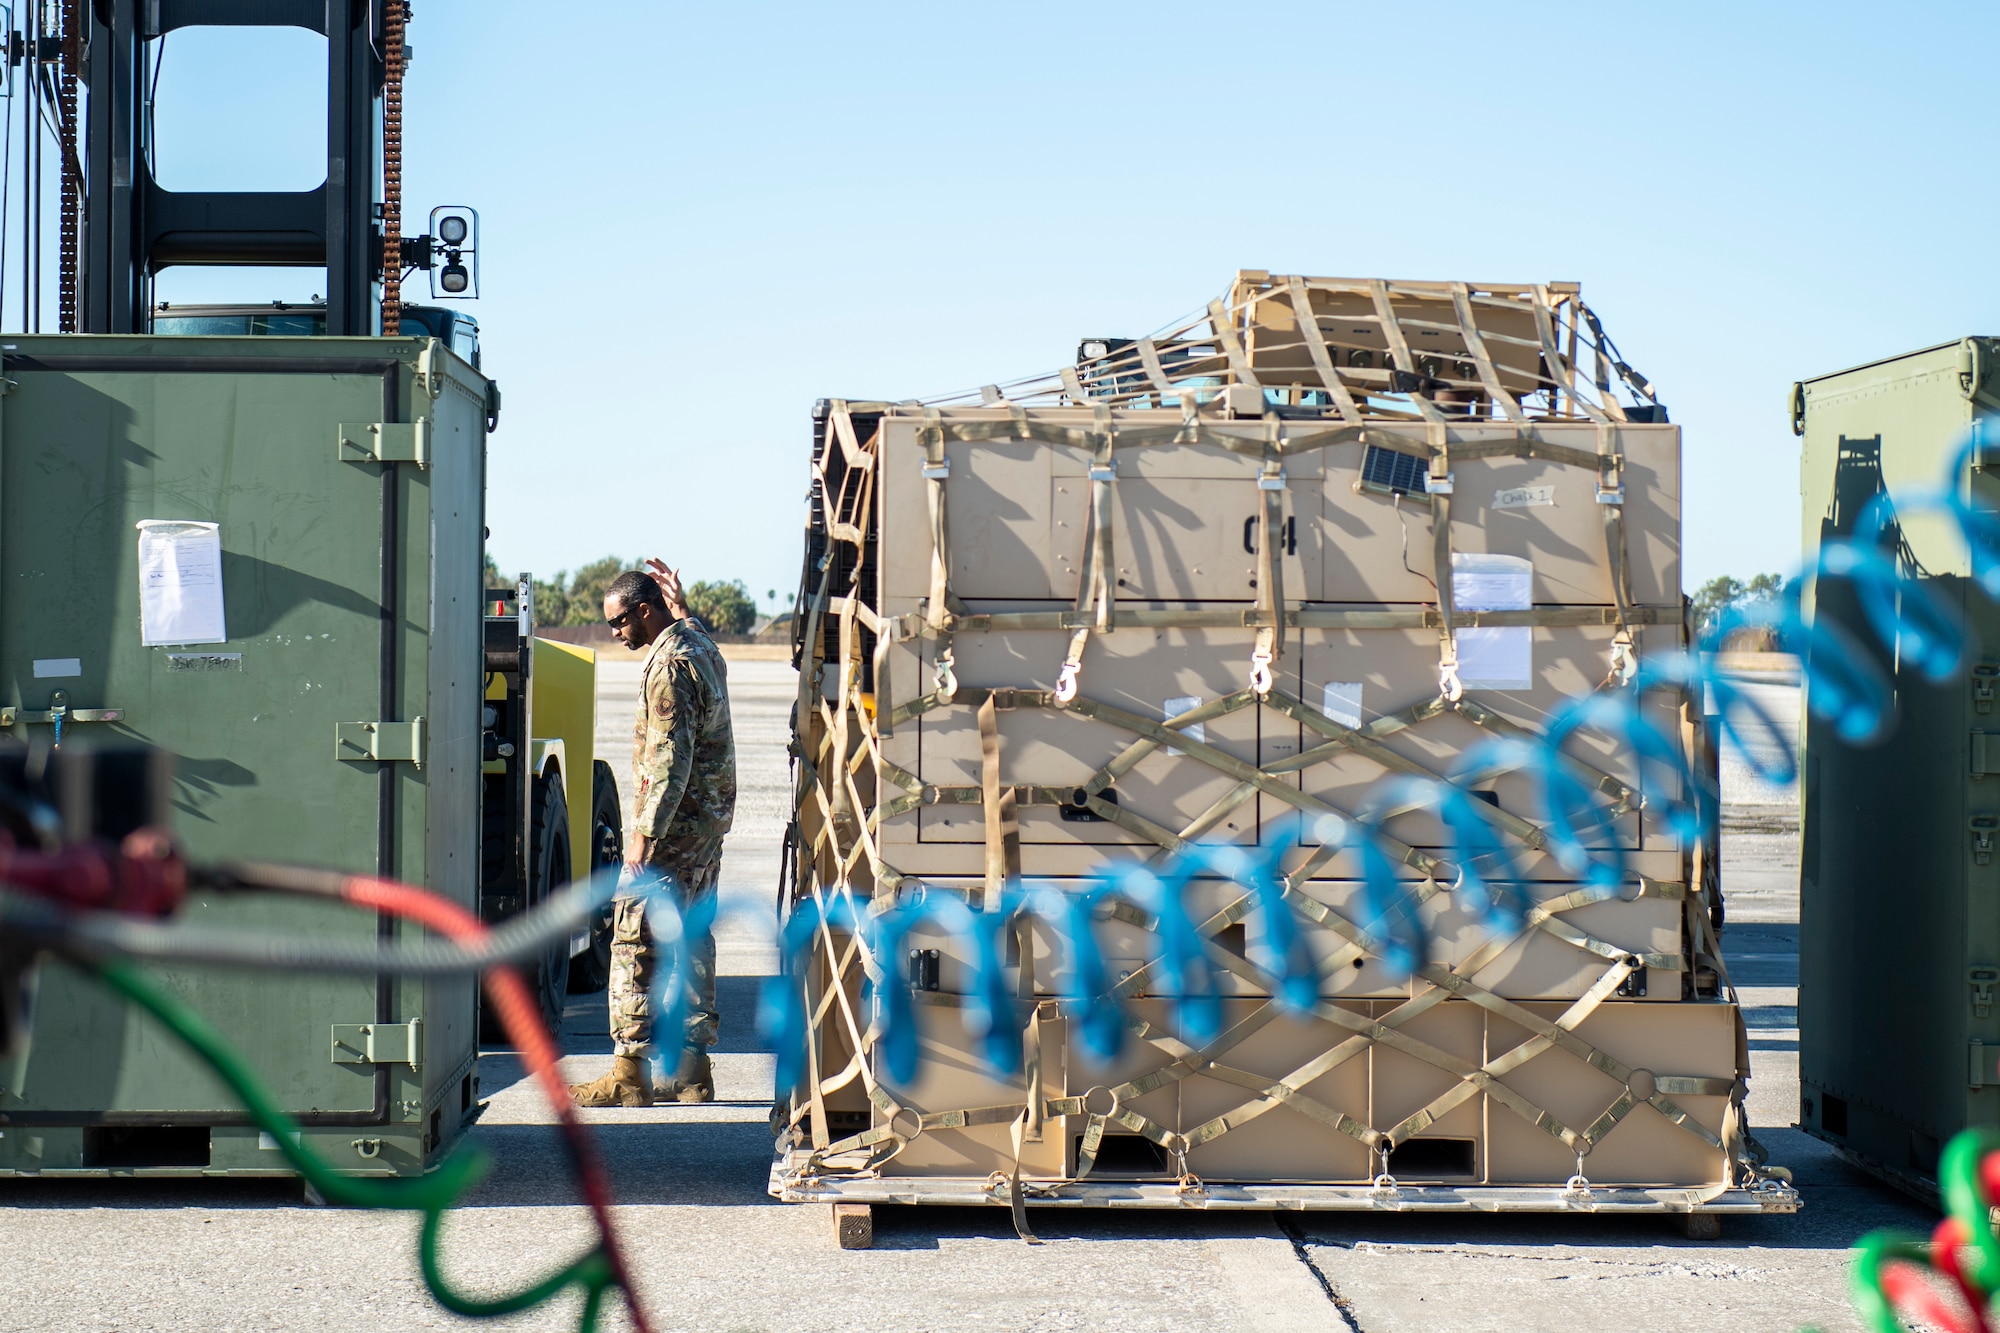 U.S. Air Force Tech. Sgt. Ismael Hayes the noncommissioned officer in charge of Air Transportation for the 24th Special Operations Wing, Detachment 1, helps load cargo at MacDill Air Force Base, Florida, Feb. 1, 2022.